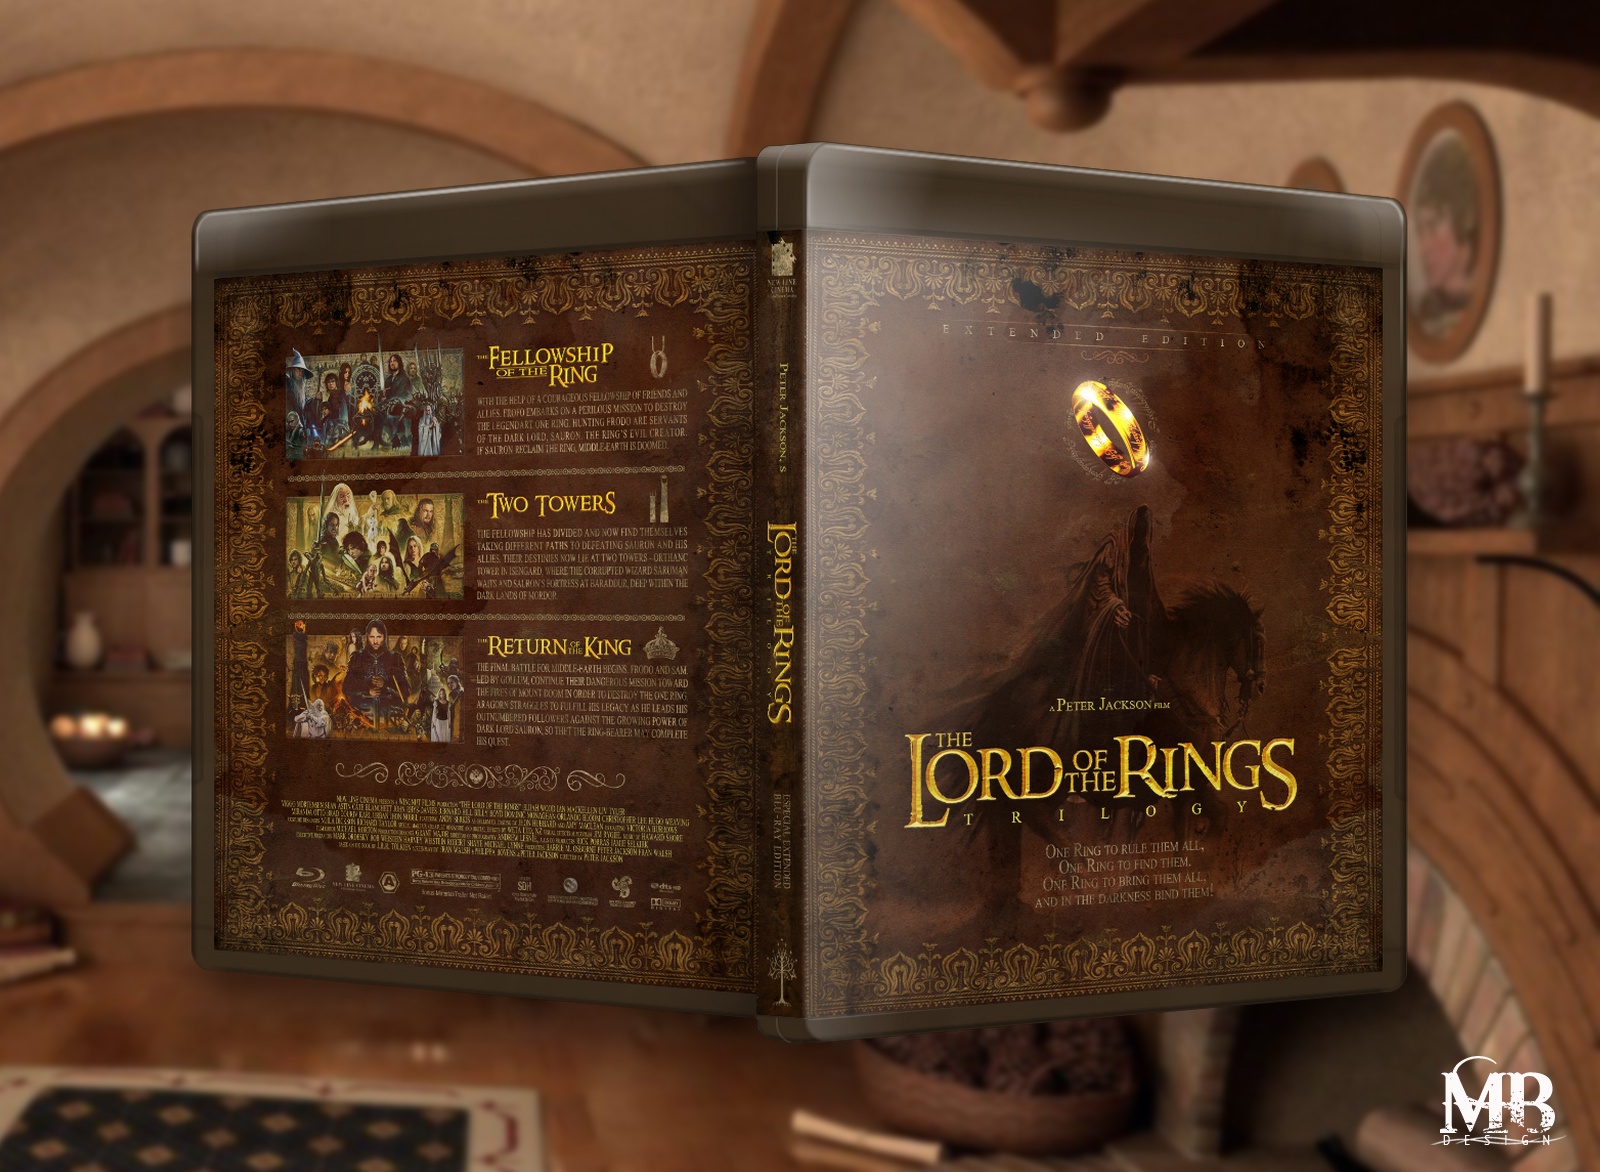 The Lord of the Rings Trilogy box cover